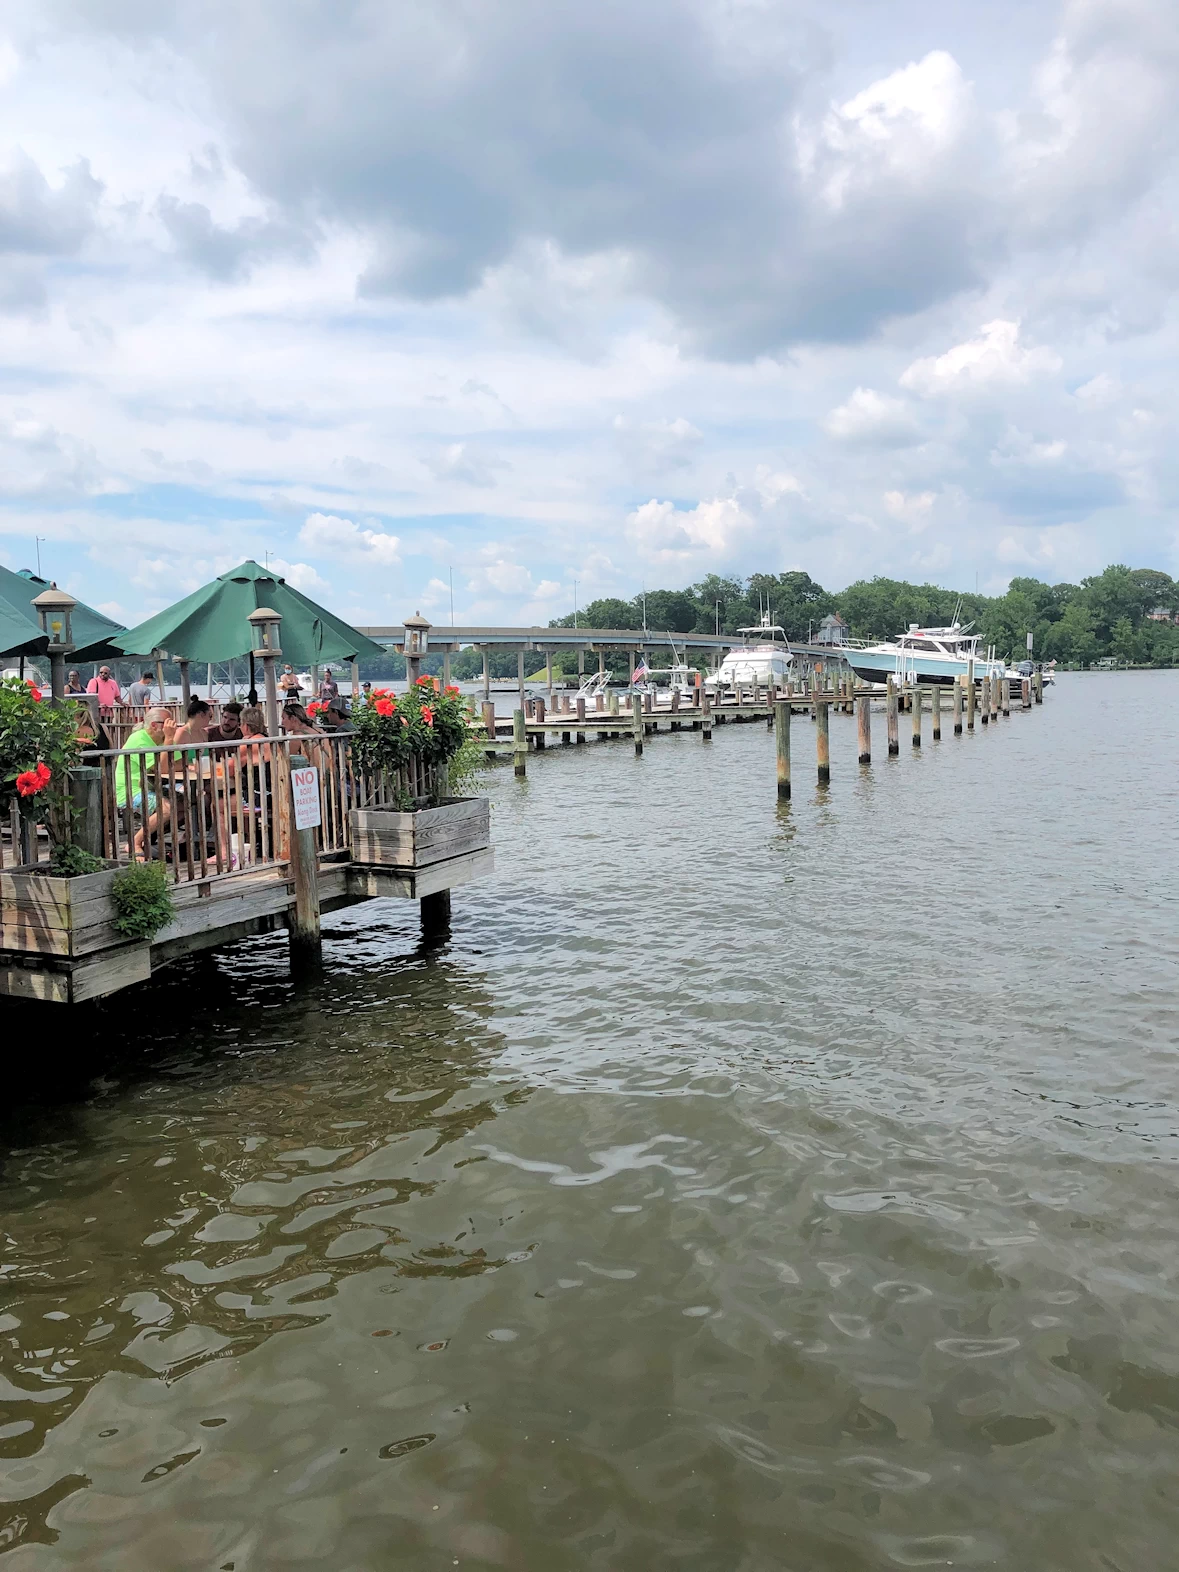 A Memorable Weekend Escape on Maryland's Chesapeake Bay